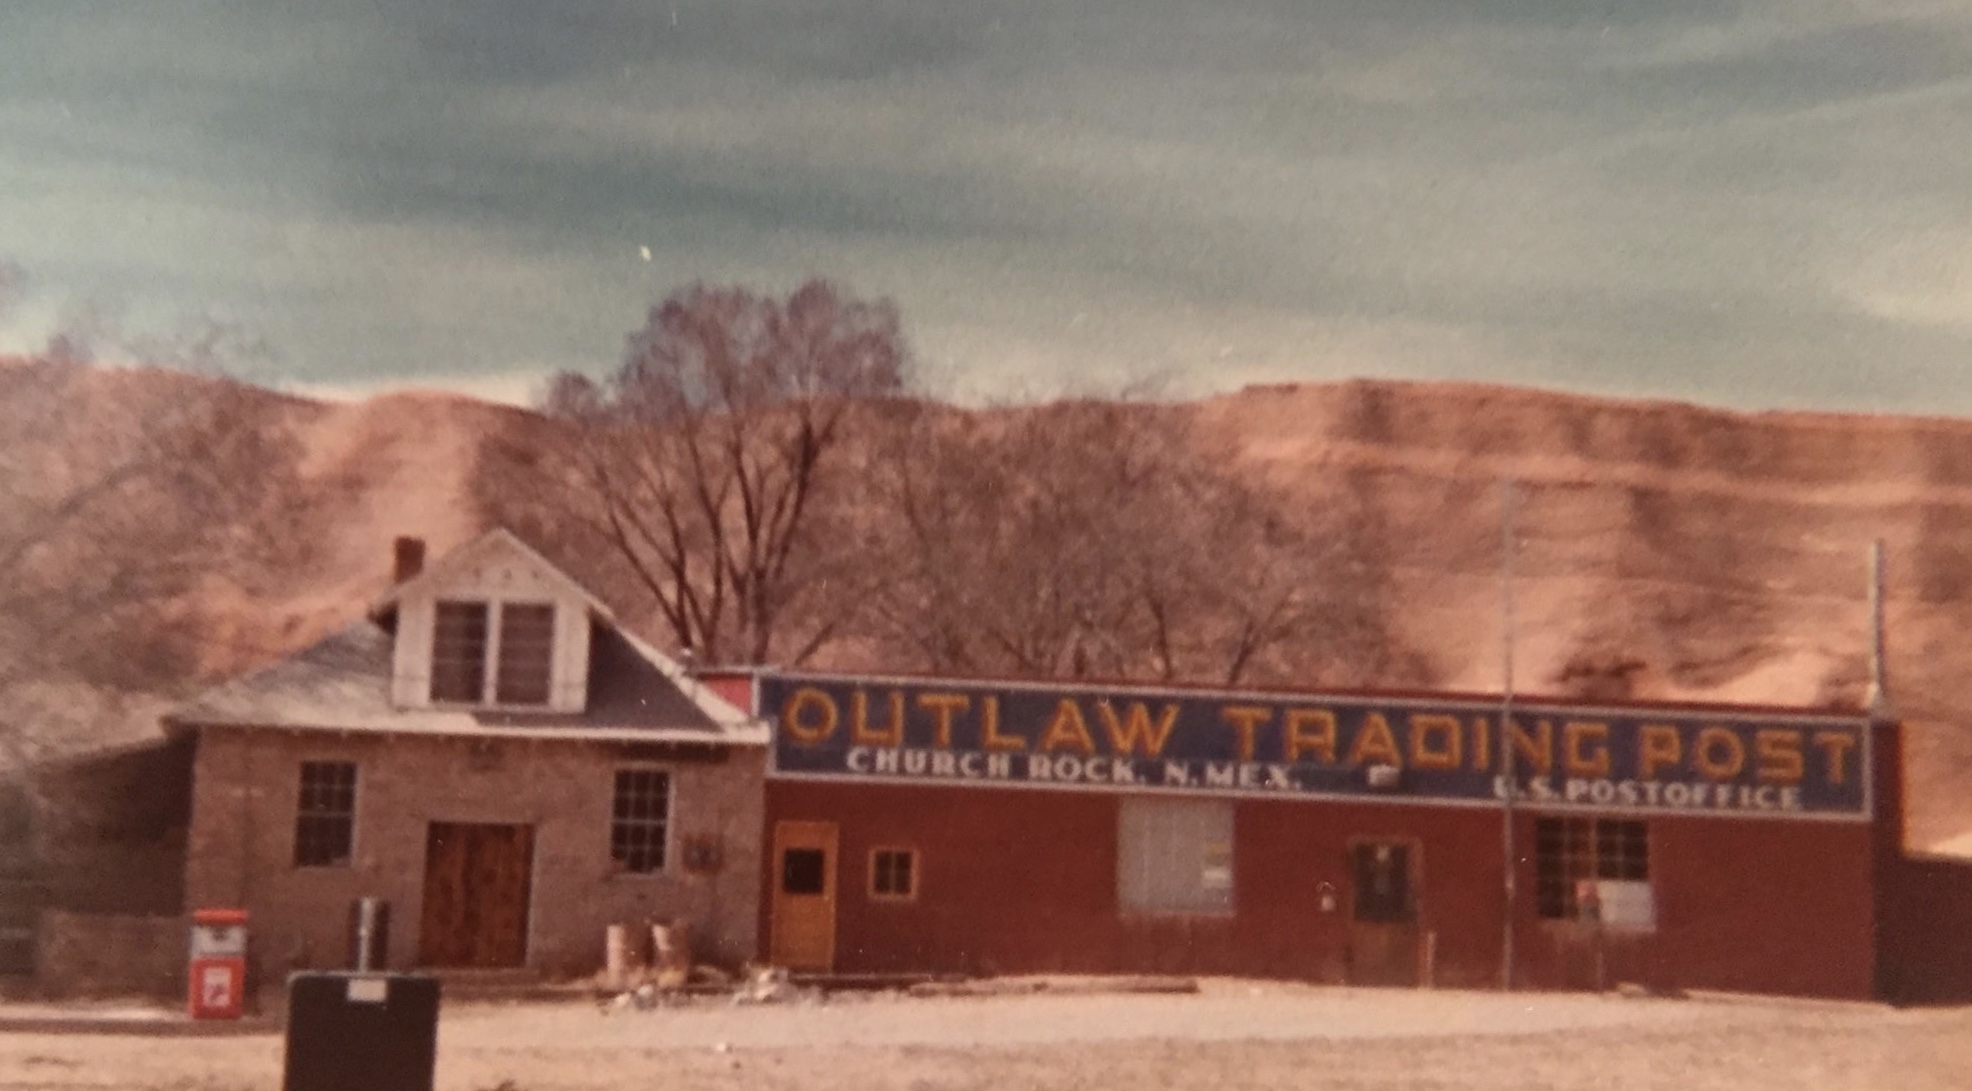 The Outlaw Trading Post in Church Rock, New Mexico, mid-1970s